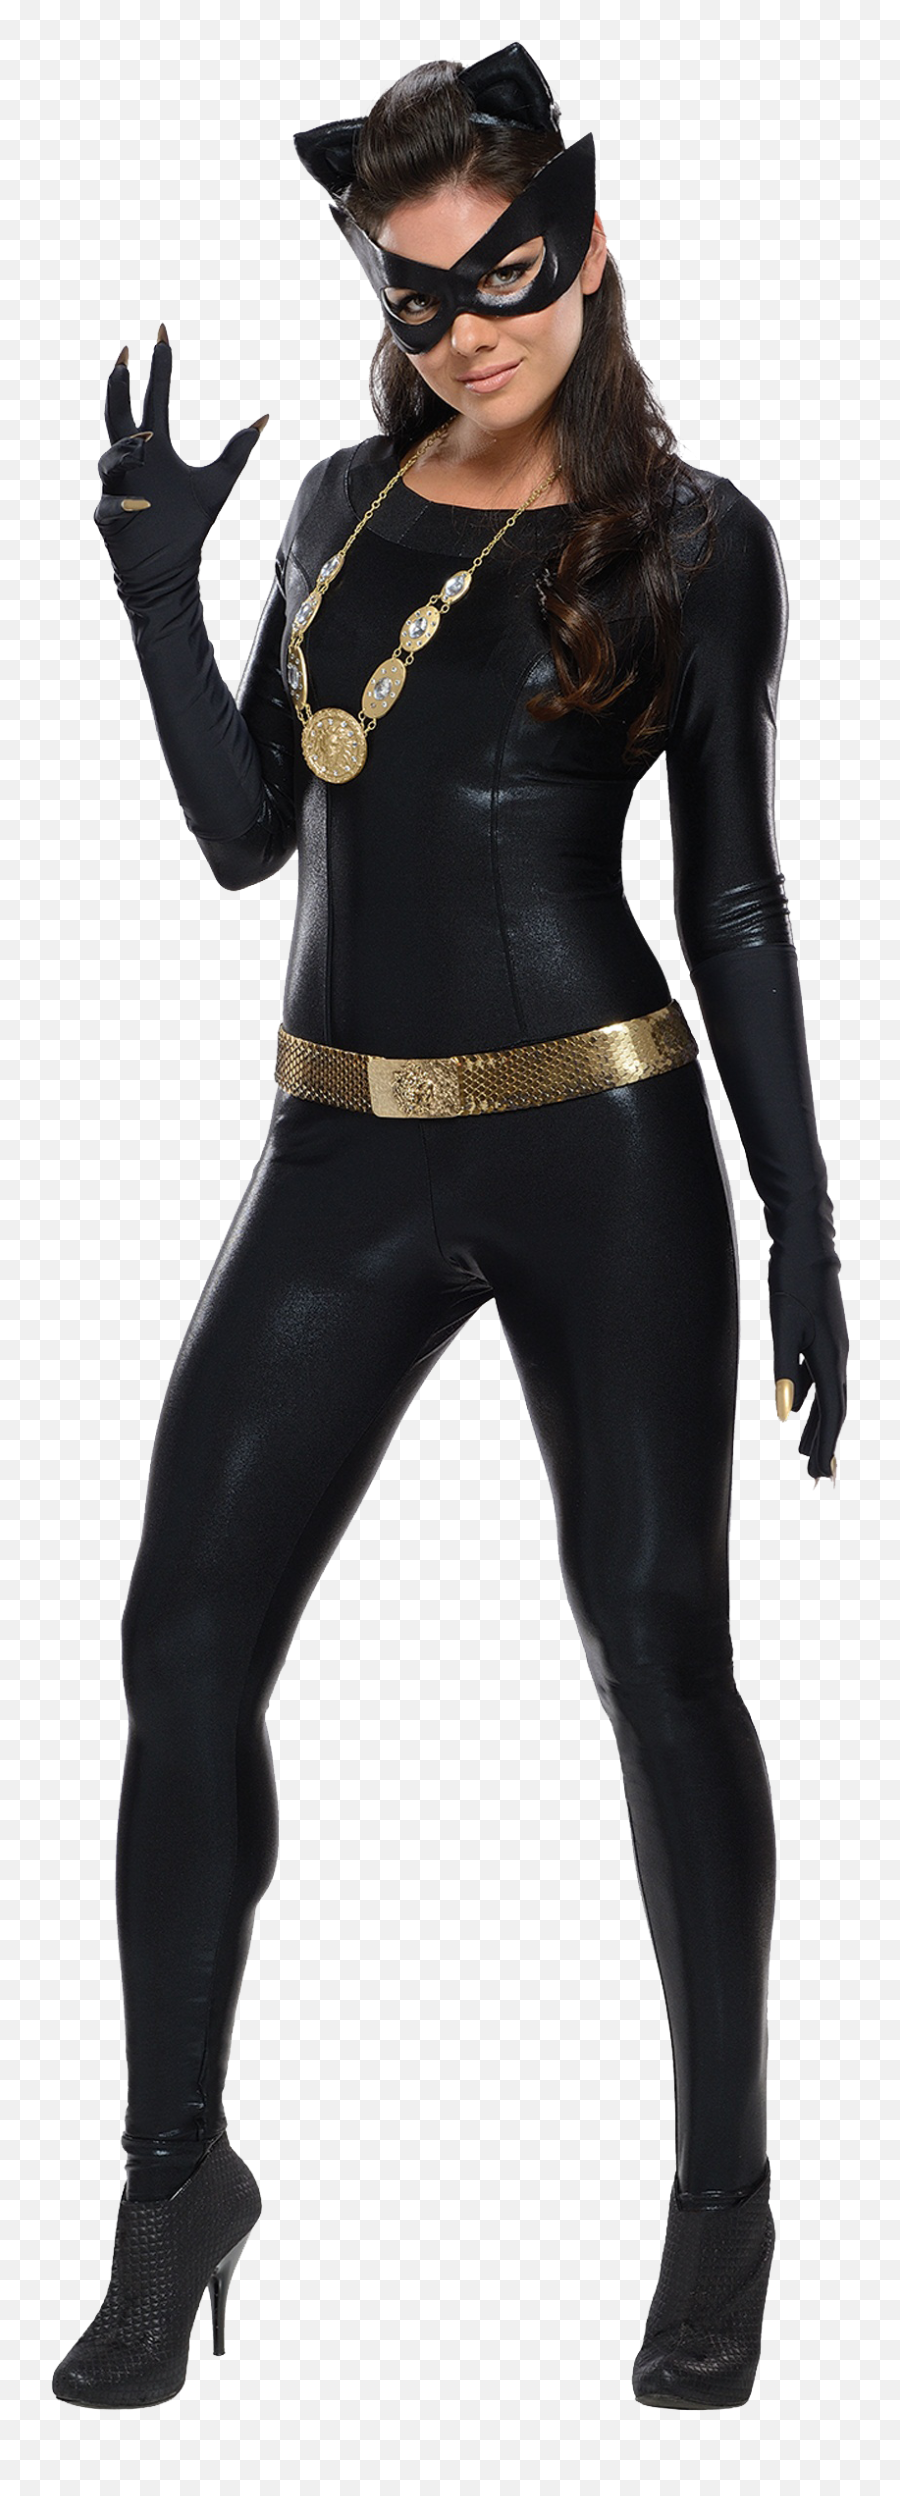 Png Transparent Images Free Download Catwoman